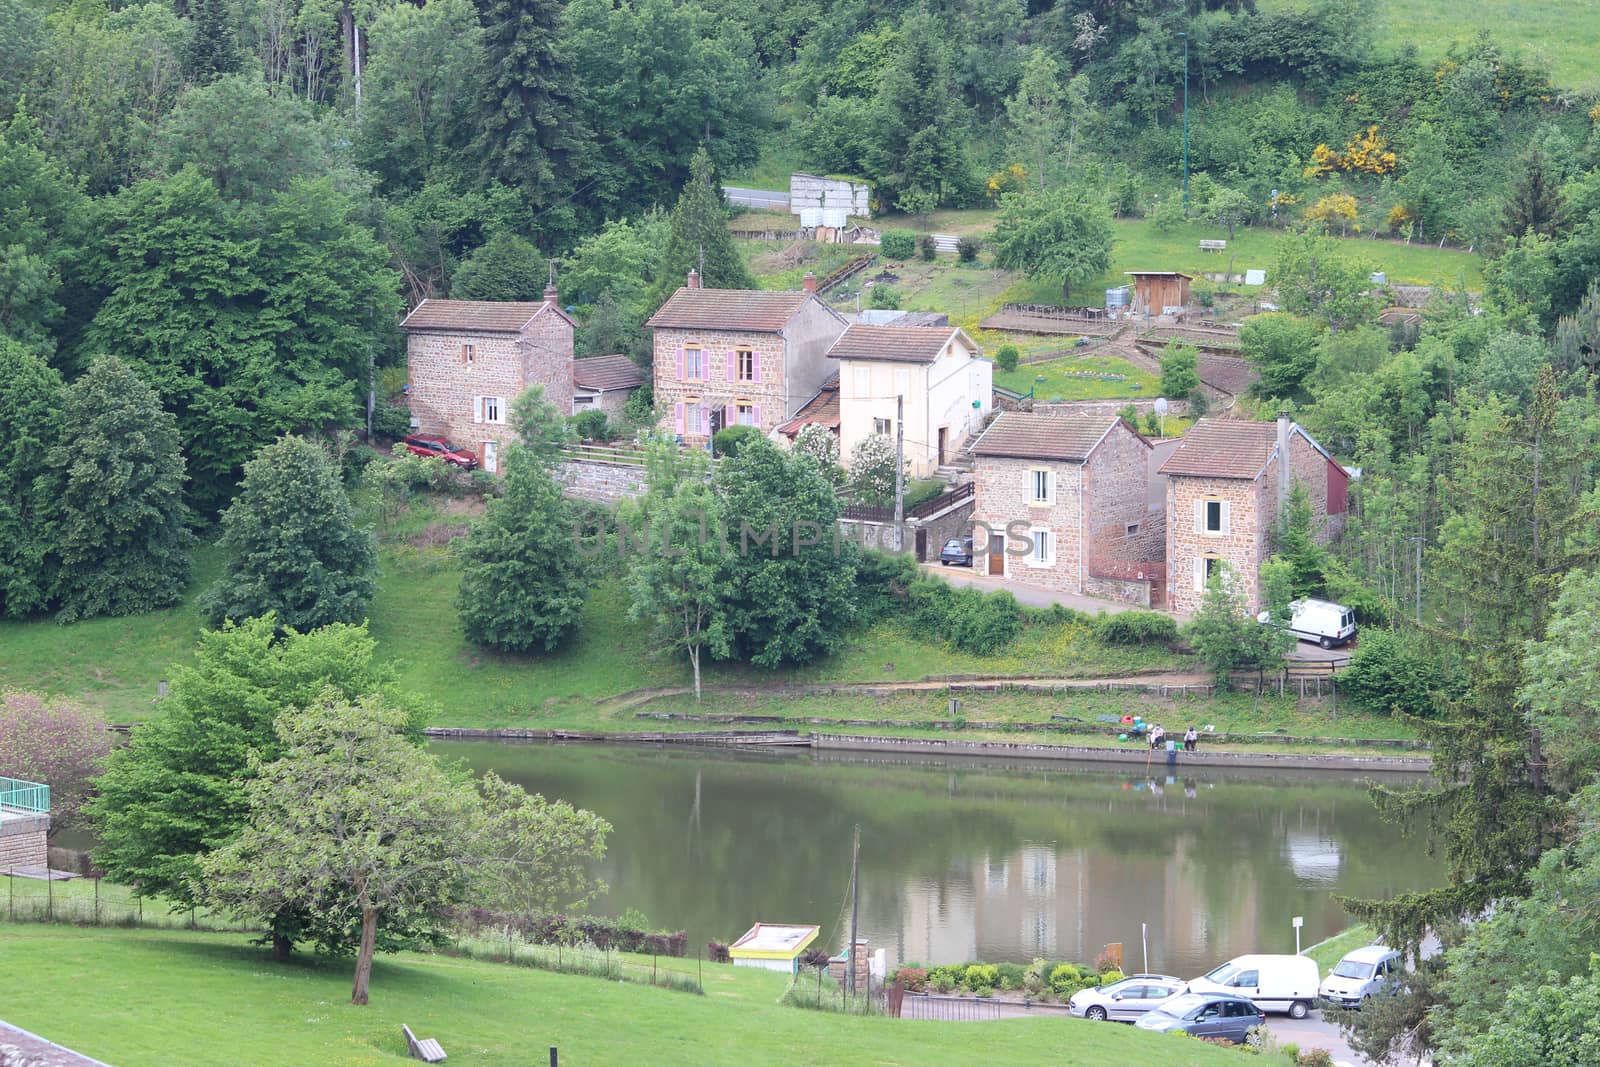 Thizy-les-Bourgs is a commune in the Rhône department in Rhône-Alpes region in eastern France